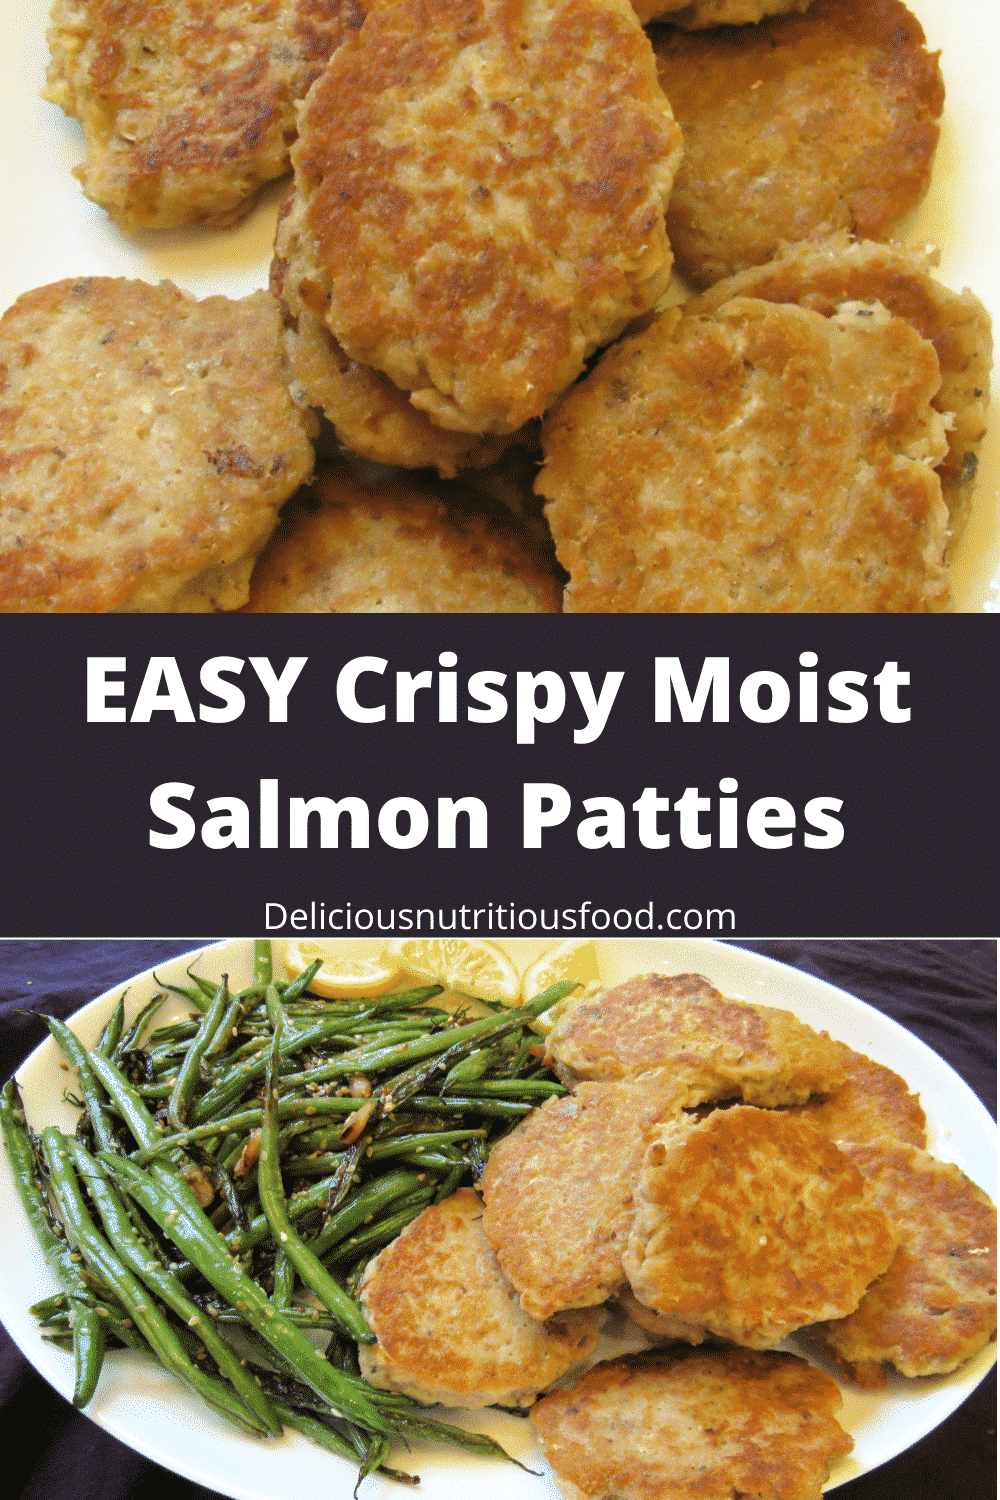 Old fashioned salmon patties served.